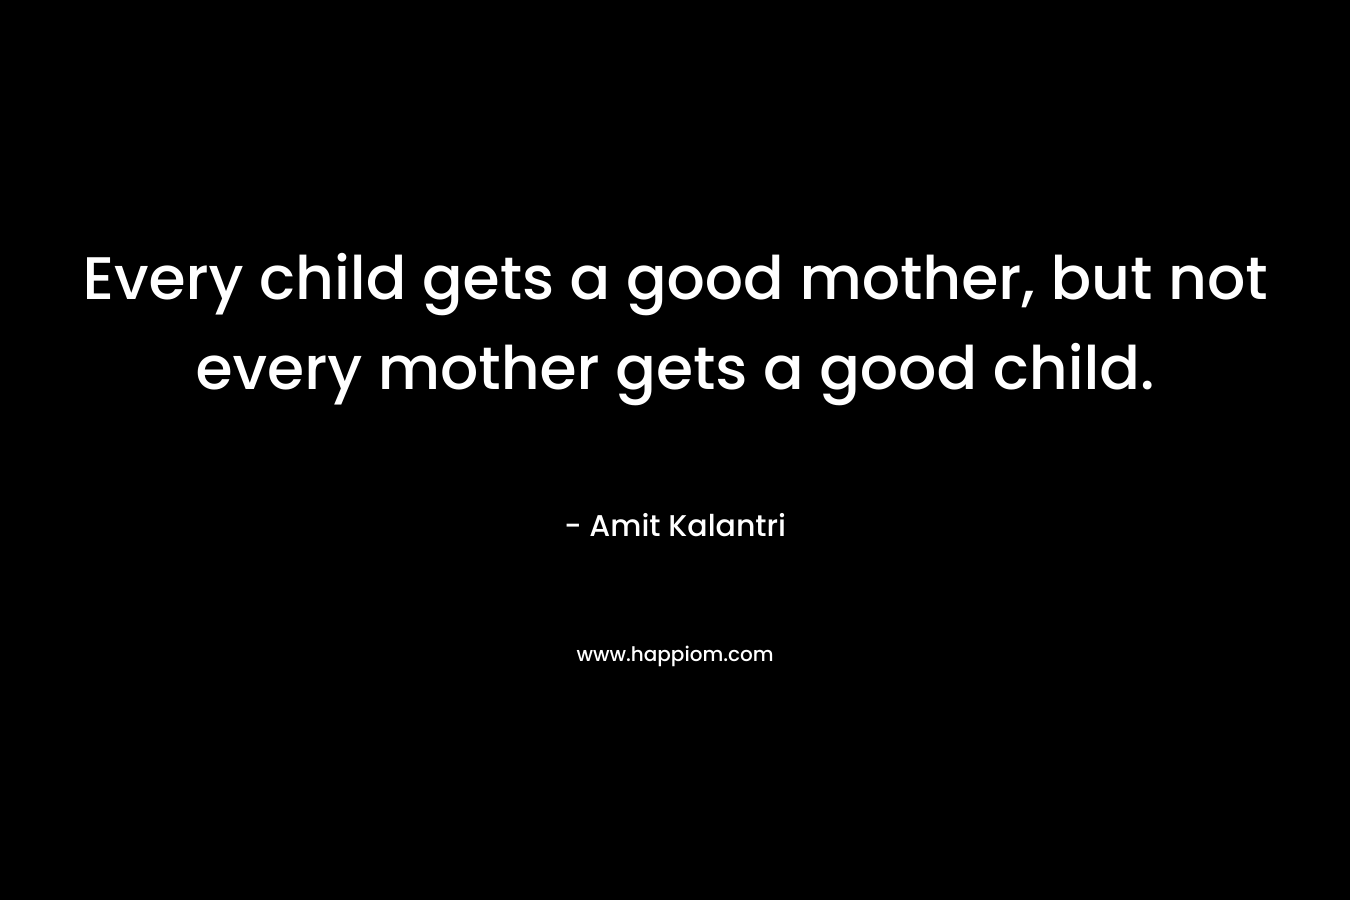 Every child gets a good mother, but not every mother gets a good child.